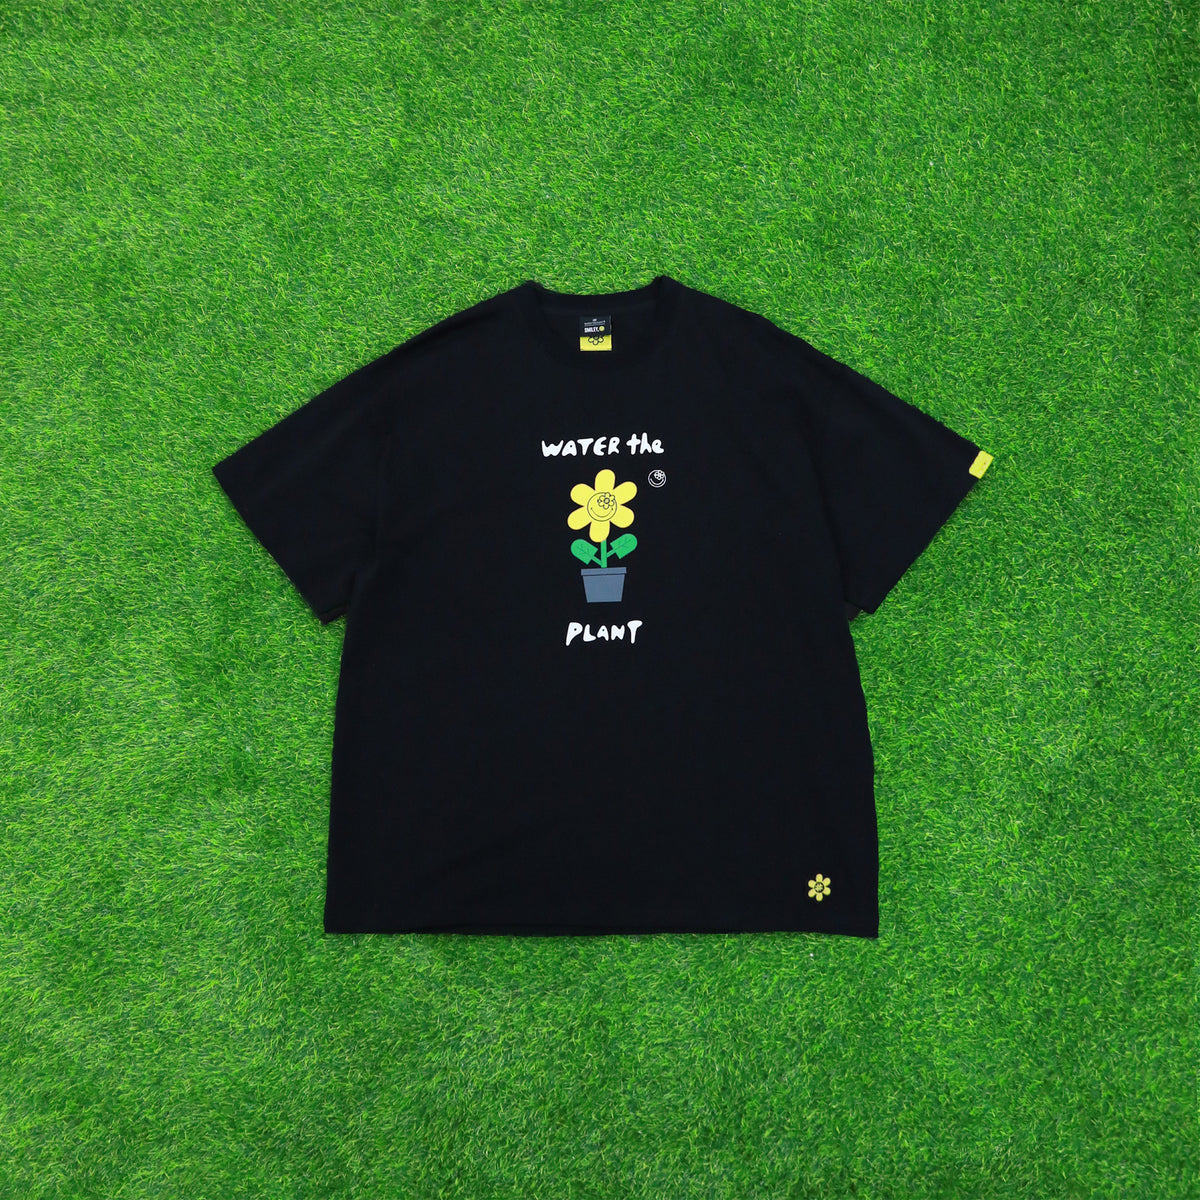 BLOOM TSHIRT | BLACK, Short sleeve, Oversized Fit, Ribbed crewneck, Yellow woven flag logo at the left sleeve, Collaboration with Smiley Color: Black, Material: 100% Cotton